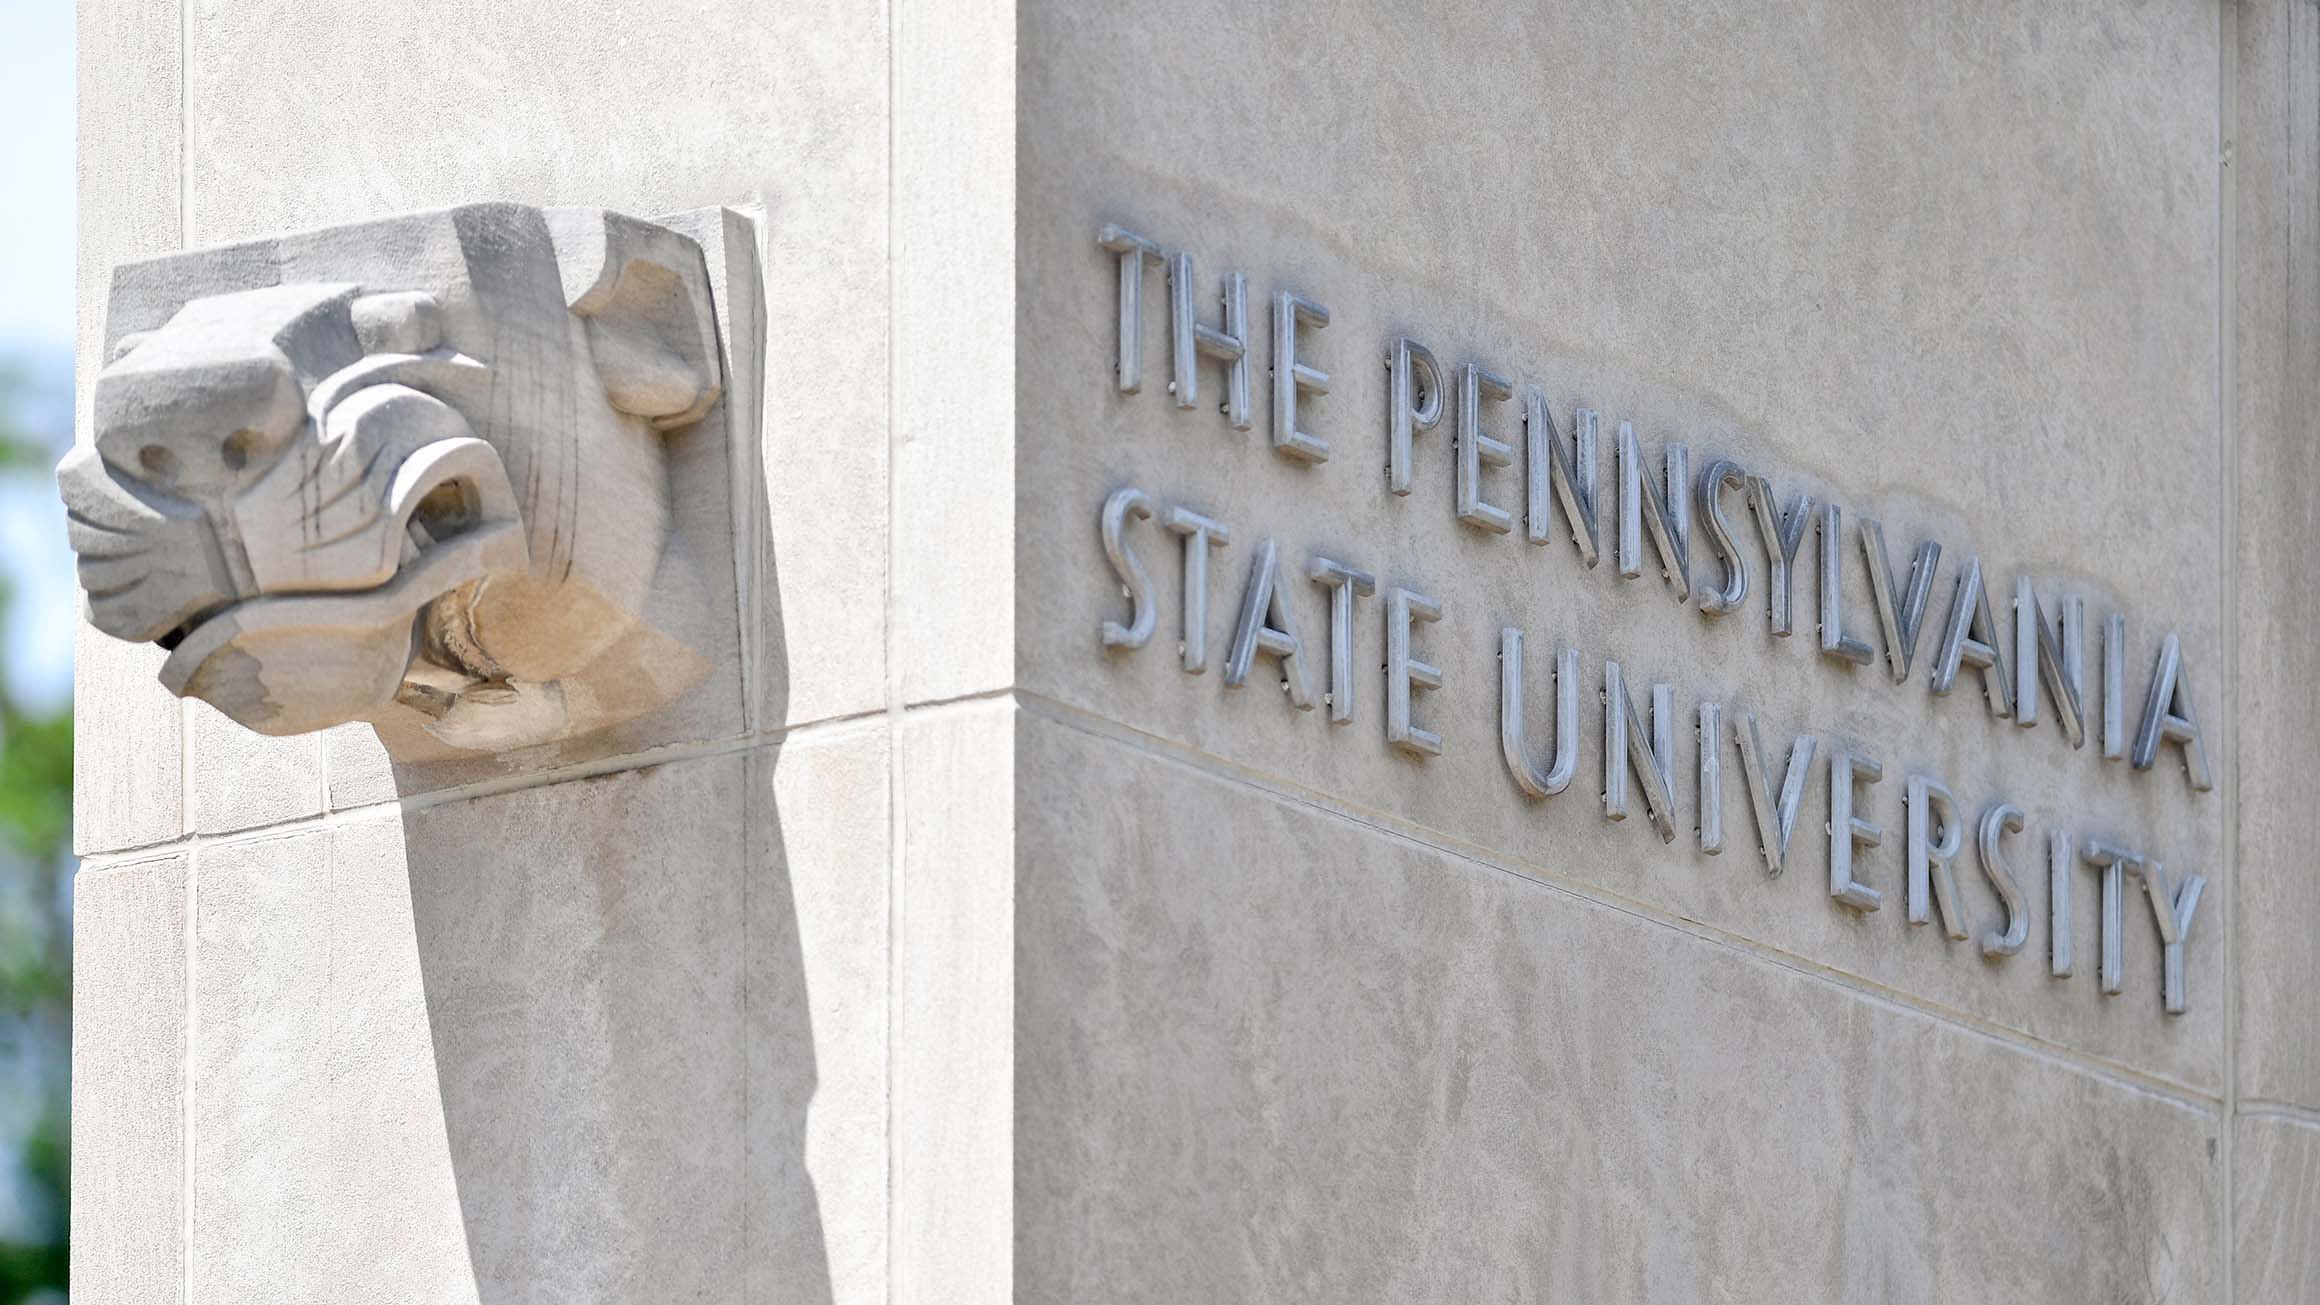 The gates of the university are shown, with the text "The Pennsylvania State University"